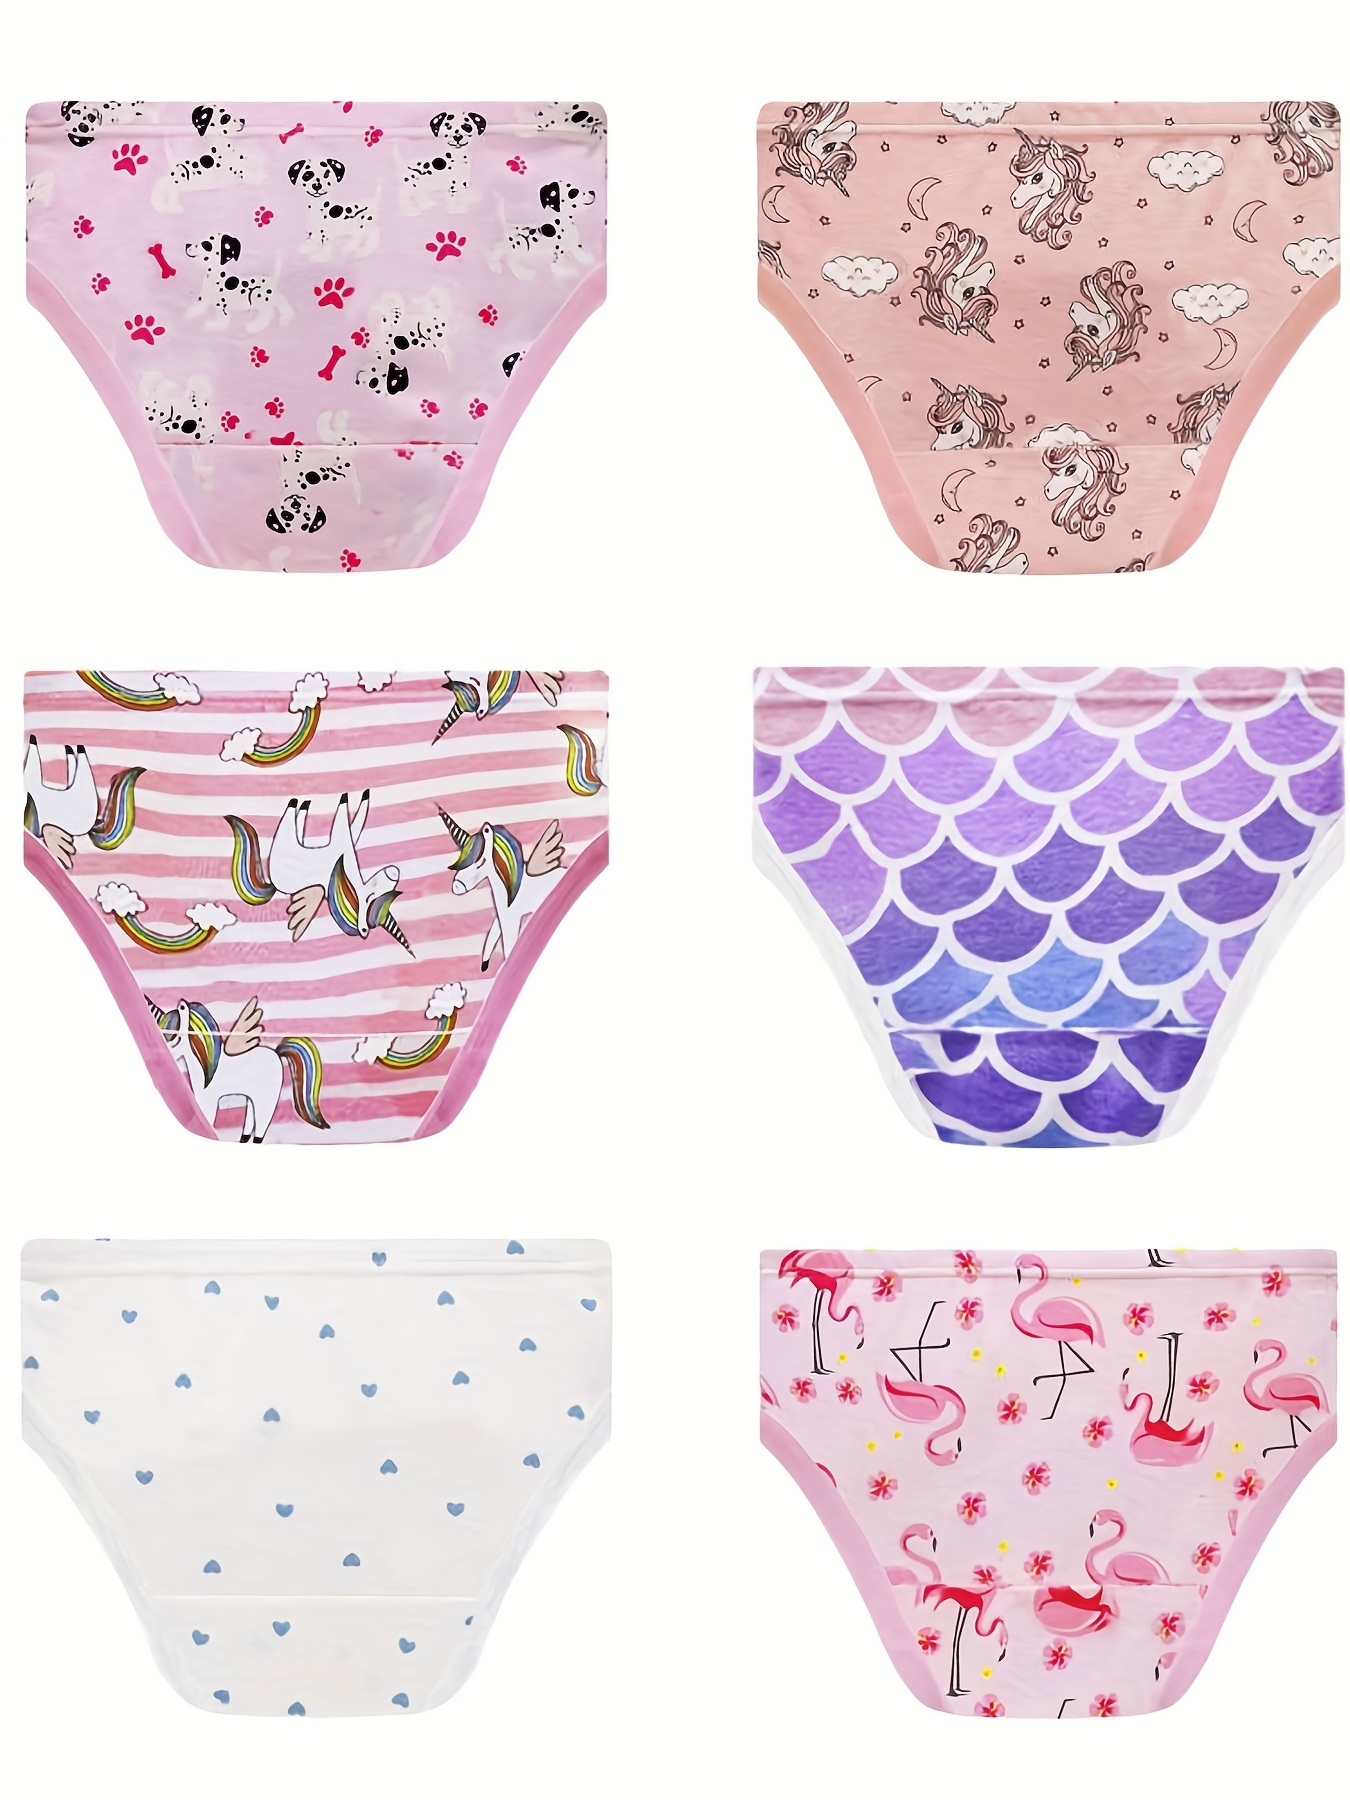 Soft Cotton Underwear for Little Girls | Pack of 6 Briefs Panties with Cute  Cartoon Designs | Sizes 1-10 Years